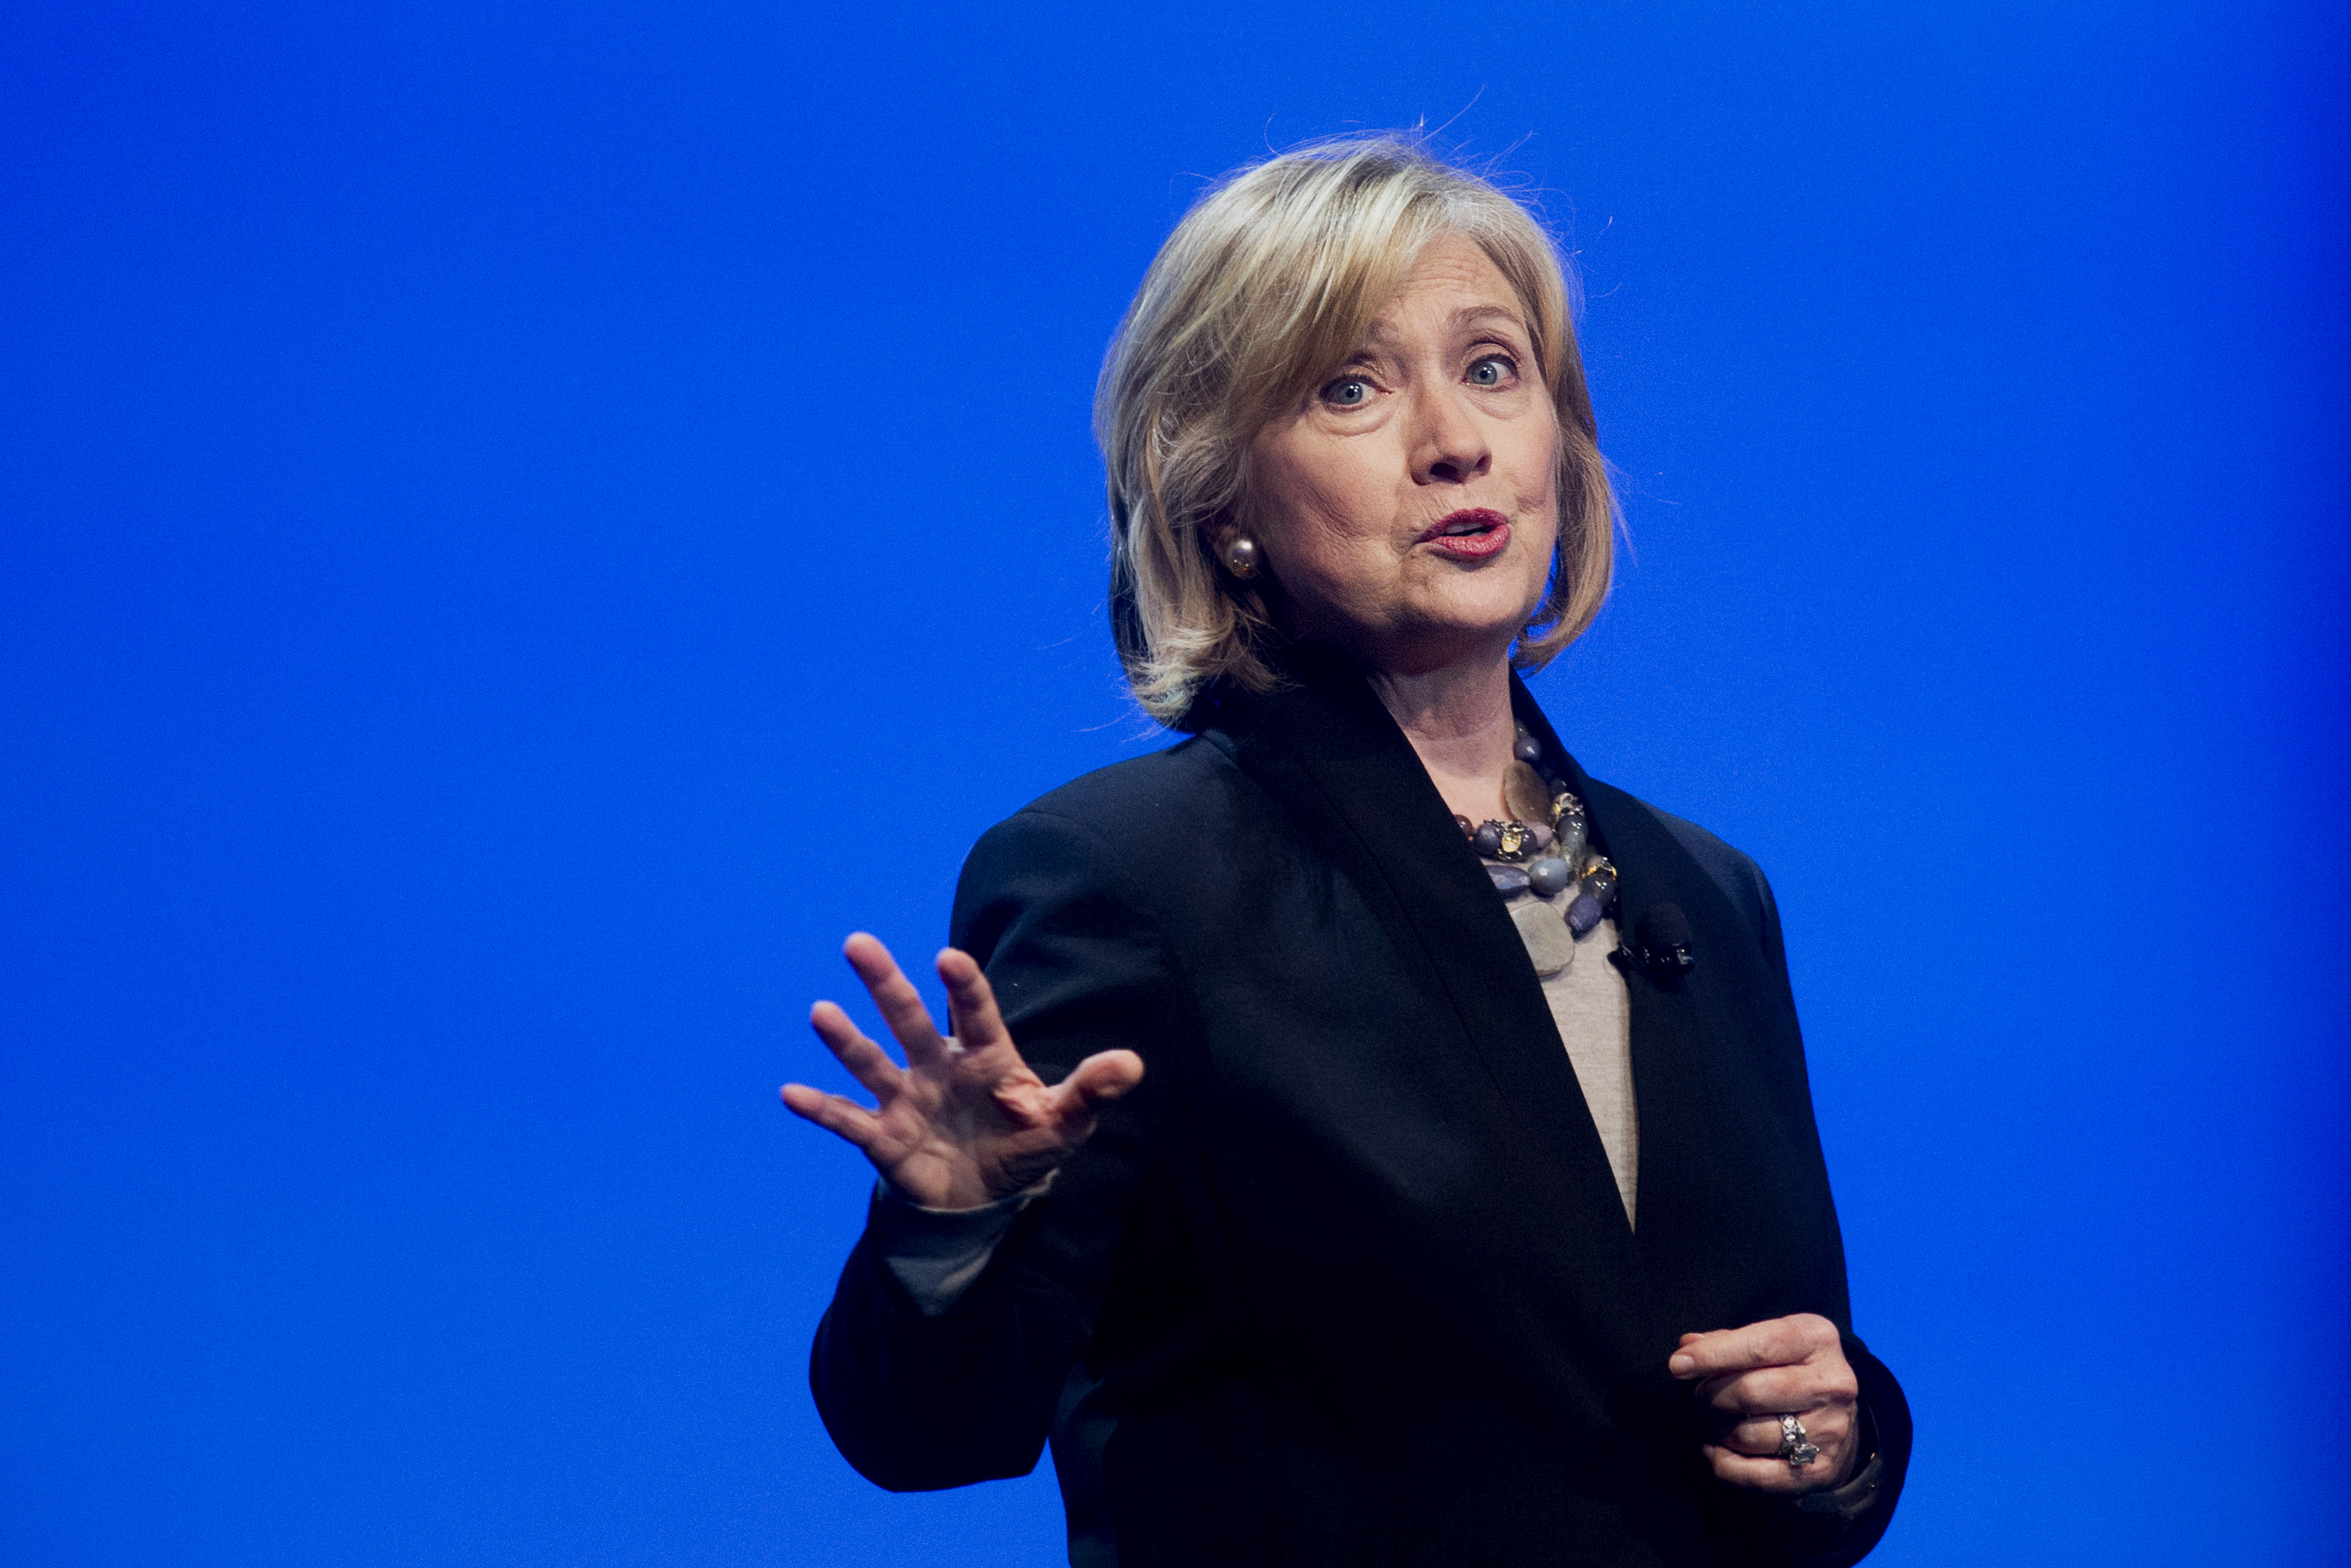 Hillary Clinton, former U.S. secretary of state, speaks during the DreamForce Conference in San Francisco, California, U.S., on Tuesday, Oct. 14, 2014. (Bloomberg—Bloomberg via Getty Images)